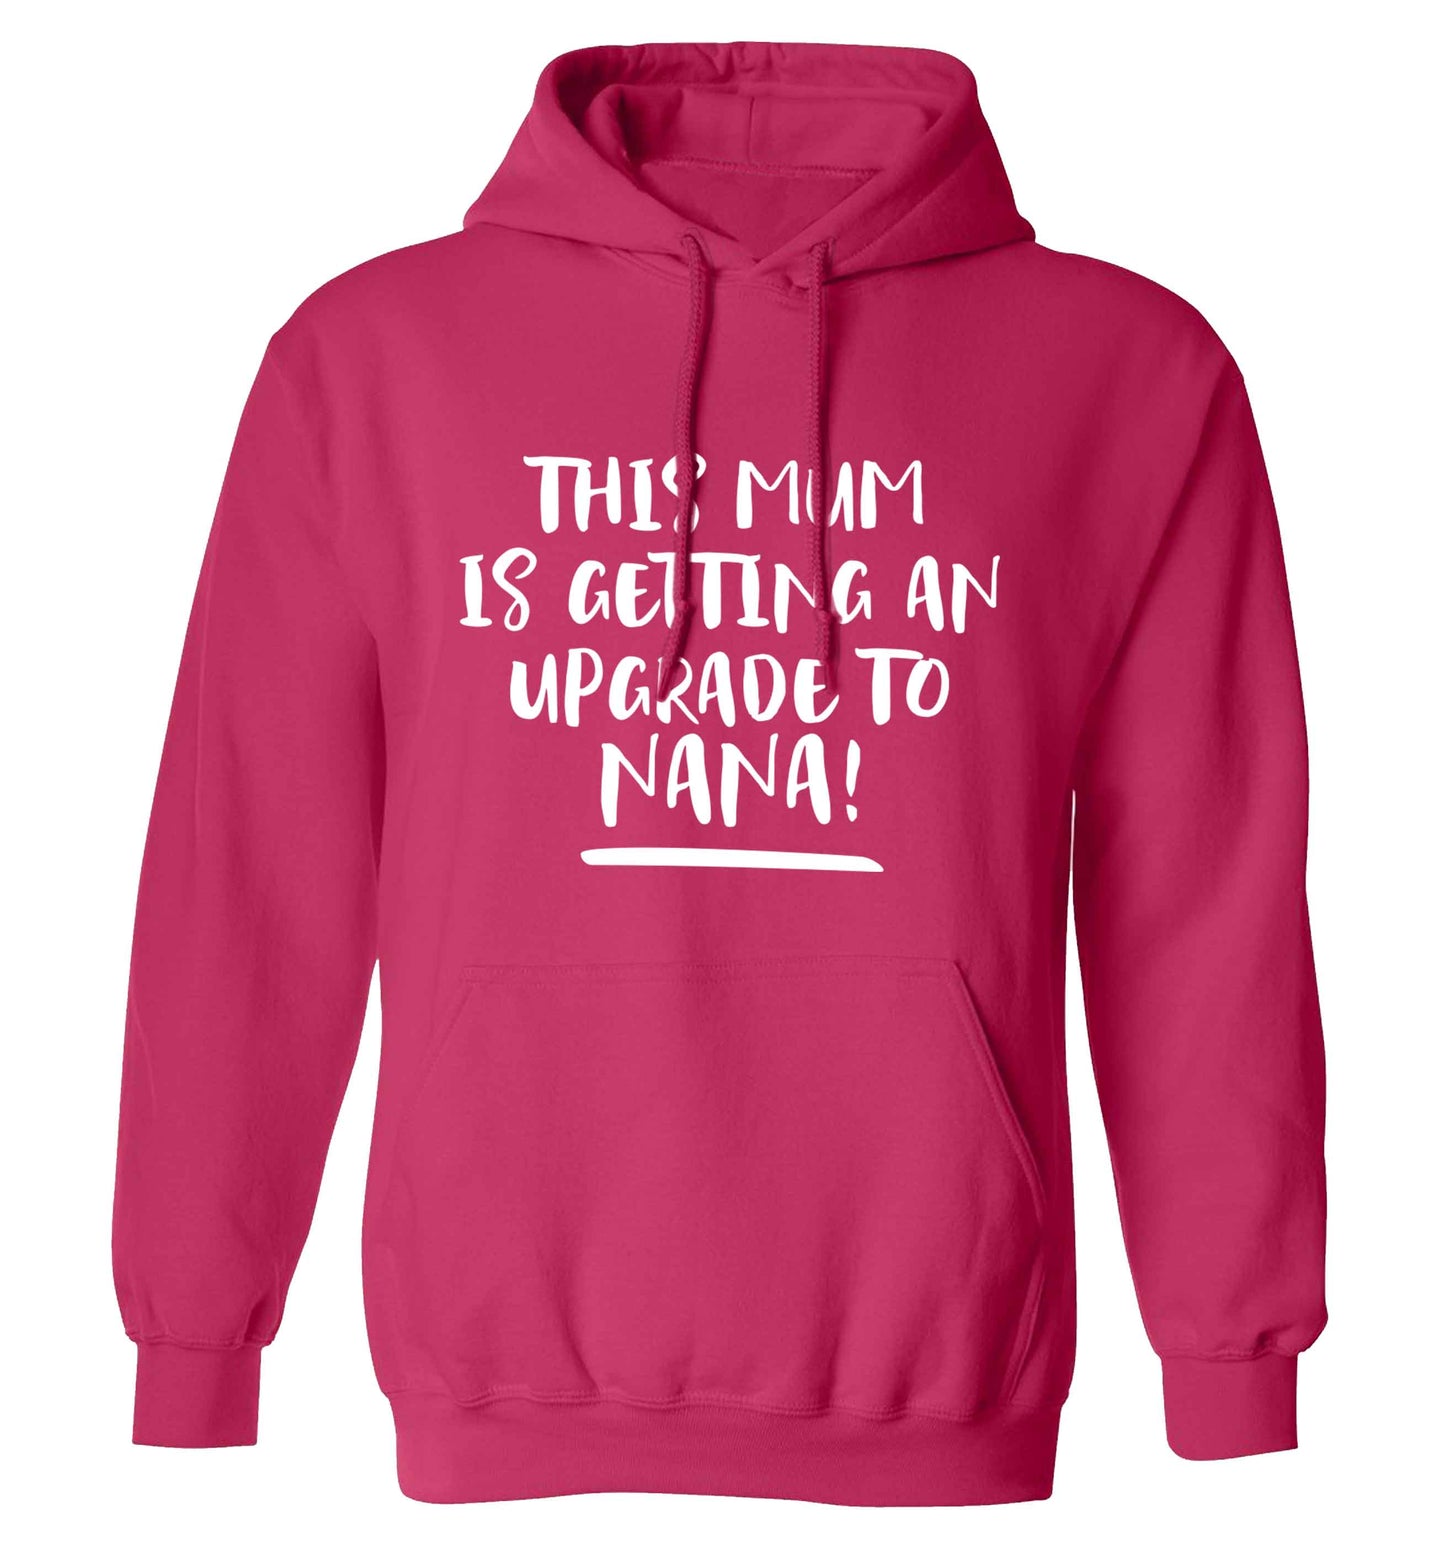 This mum is getting an upgrade to nana! adults unisex pink hoodie 2XL